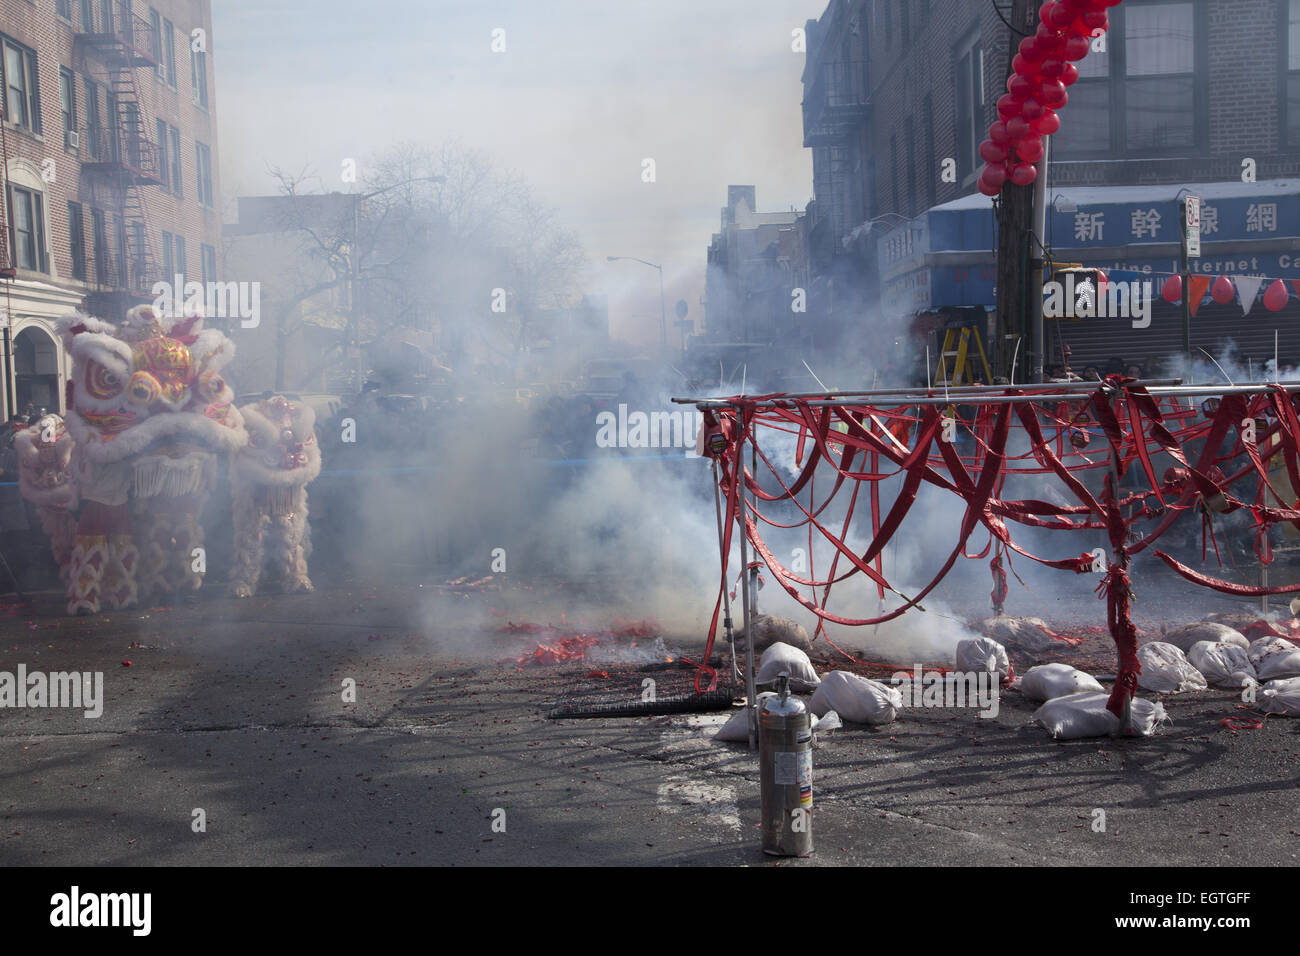 Street becomes enveloped in smoke during the firecracker ceremony on Chinese New Year in the Chinatown section of Brooklyn, NY. Chinese people from the Chinatown/Sunset Park neighborhood of Brooklyn, NY celebrate Chinese New Year  with a parade and festival bringing in The Year Of The Ram, 2015 Stock Photo